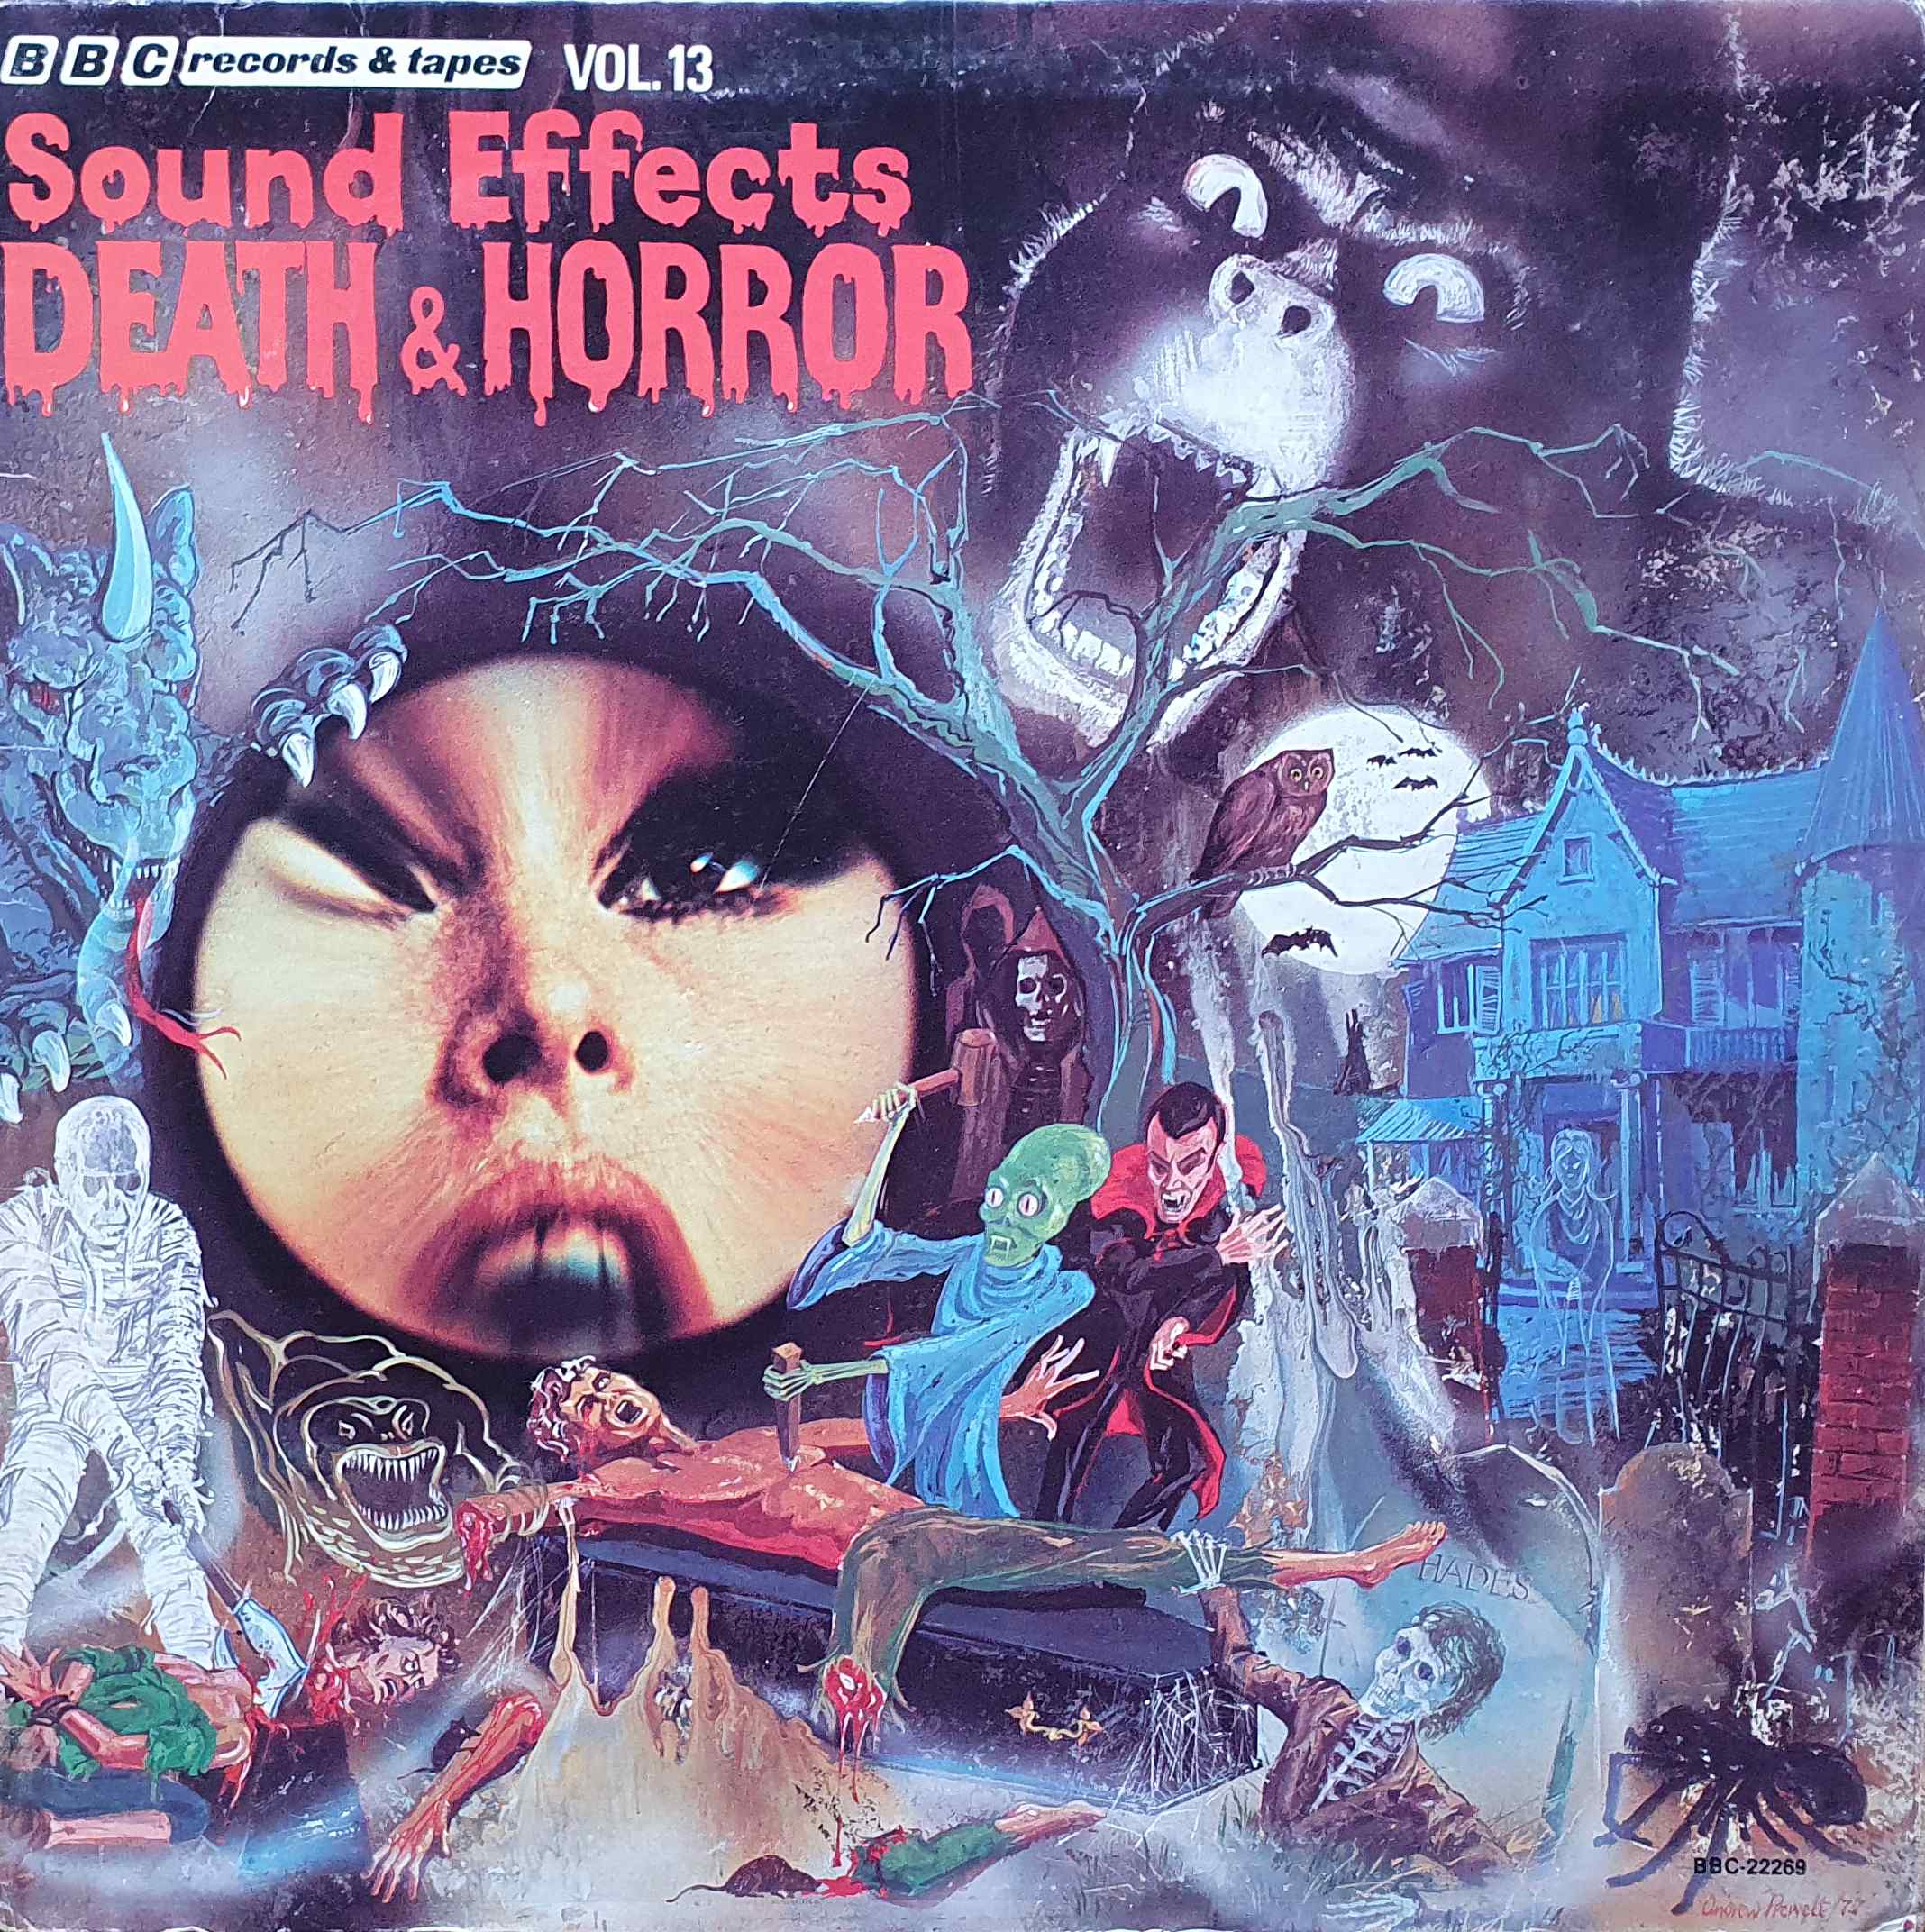 Picture of BBC - 22269 Sound effects no. 13 - Death & horror (US import) album by artist Various from the BBC records and Tapes library